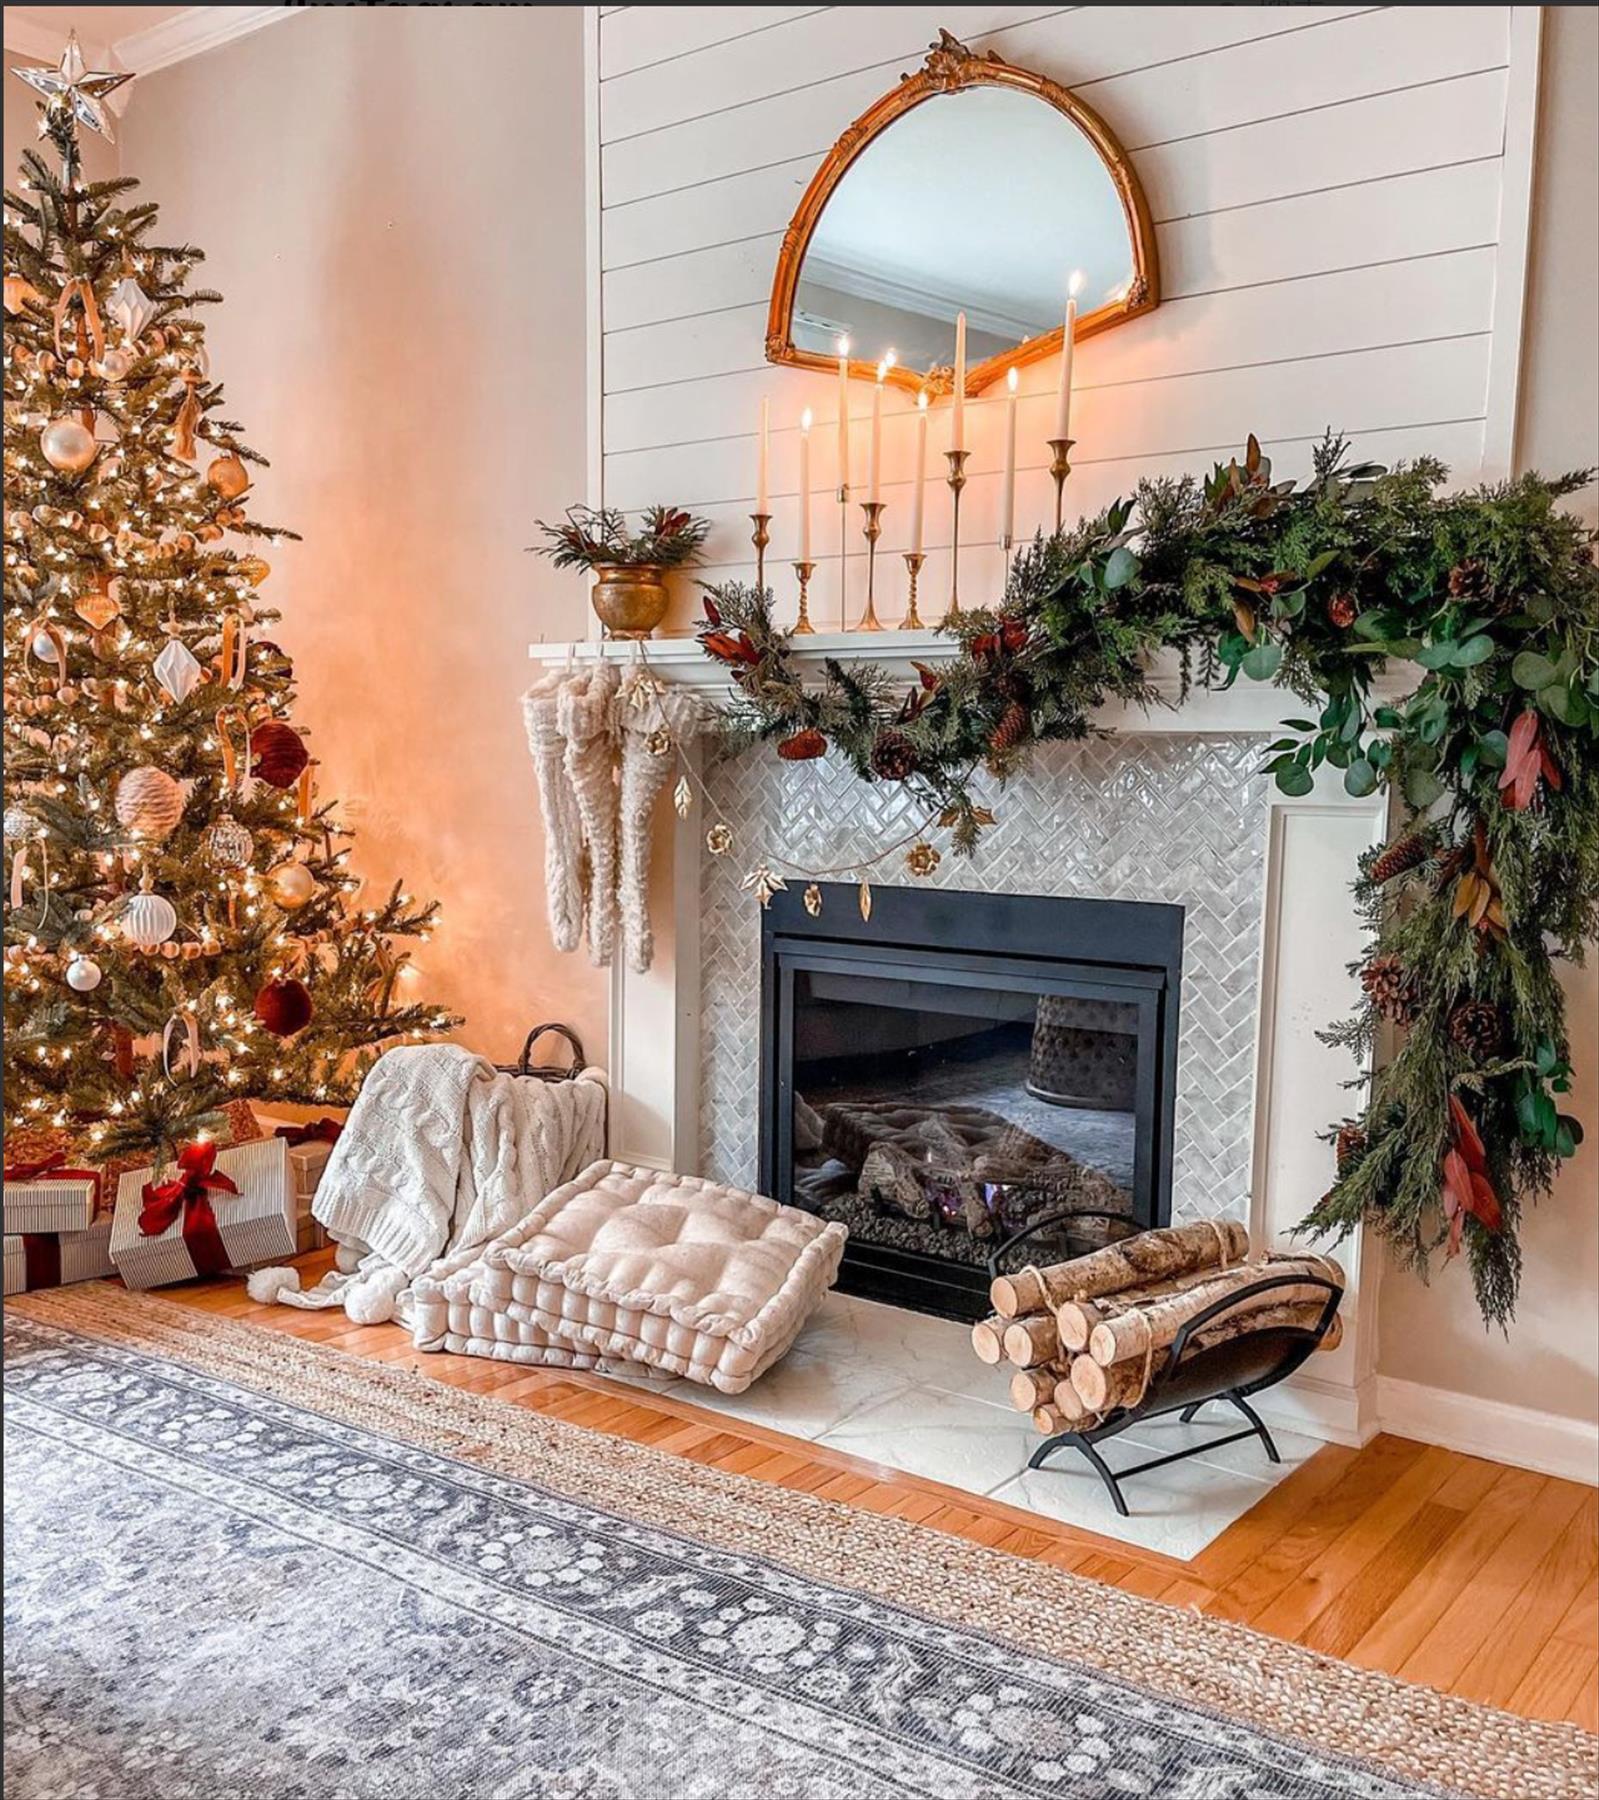 30 Cozy Christmas fireplace decor ideas to Warm Your Holiday